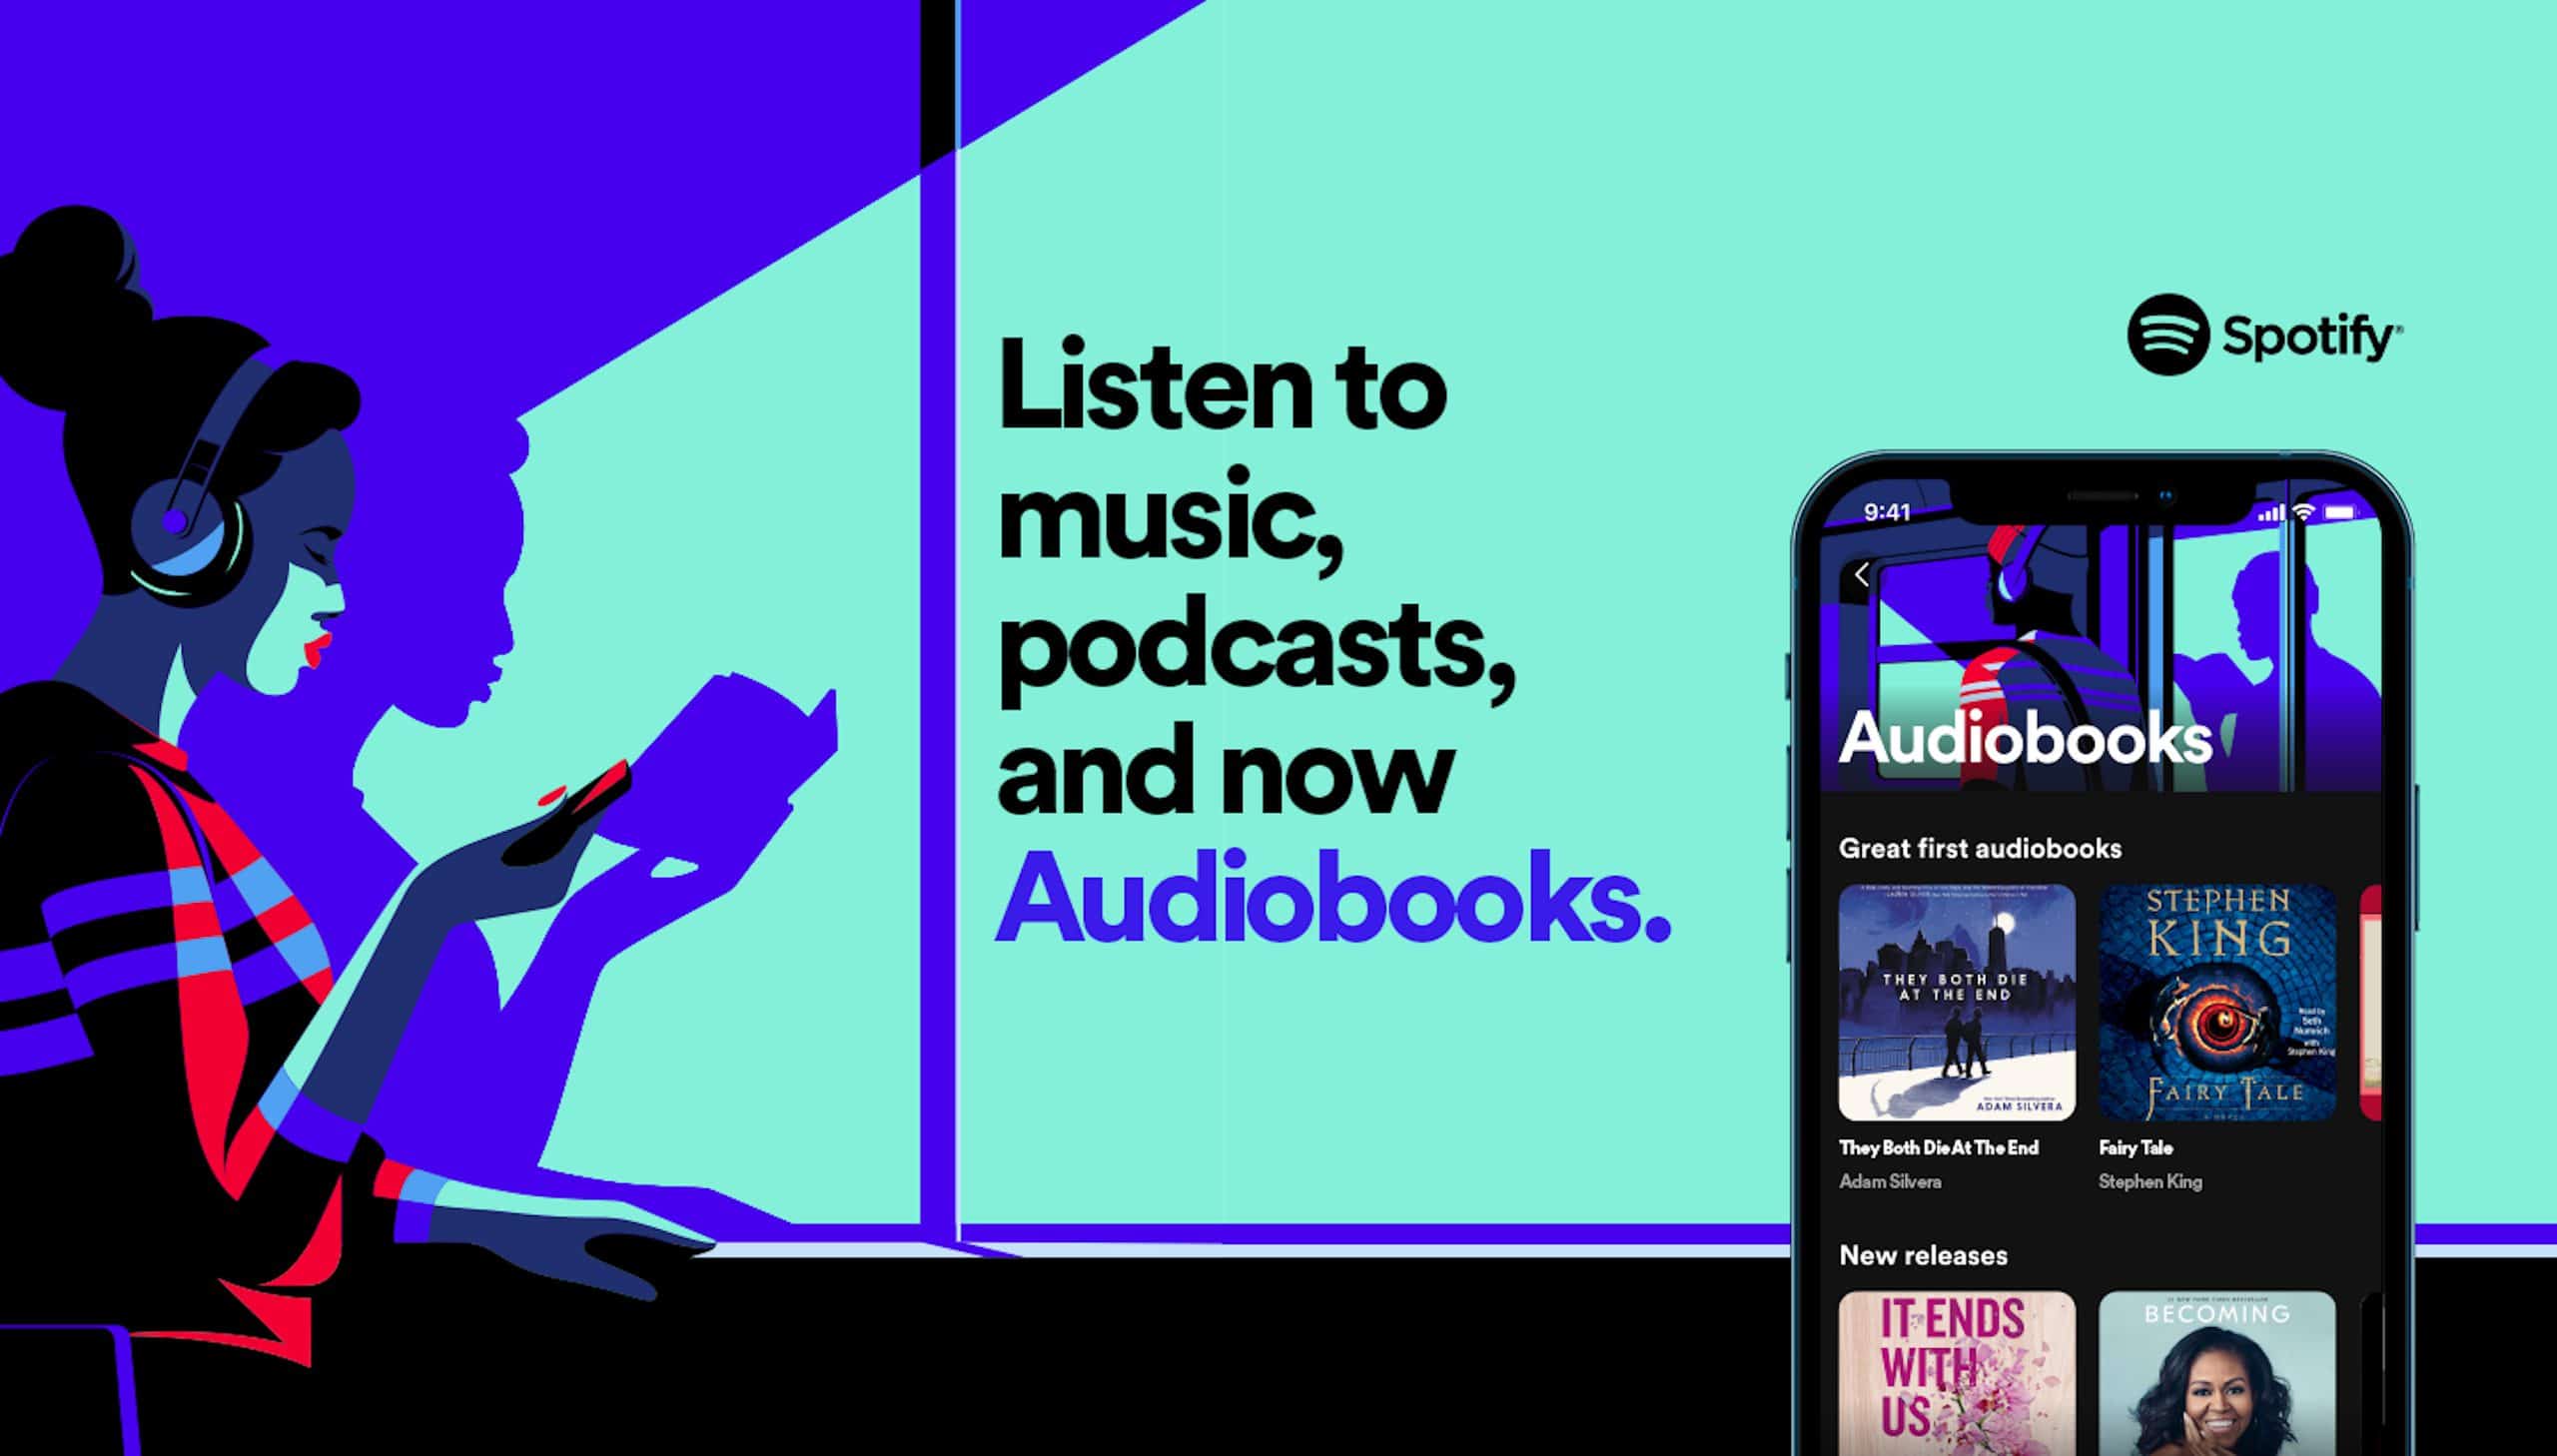 Spotify launches Audiobooks, requires separate purchase